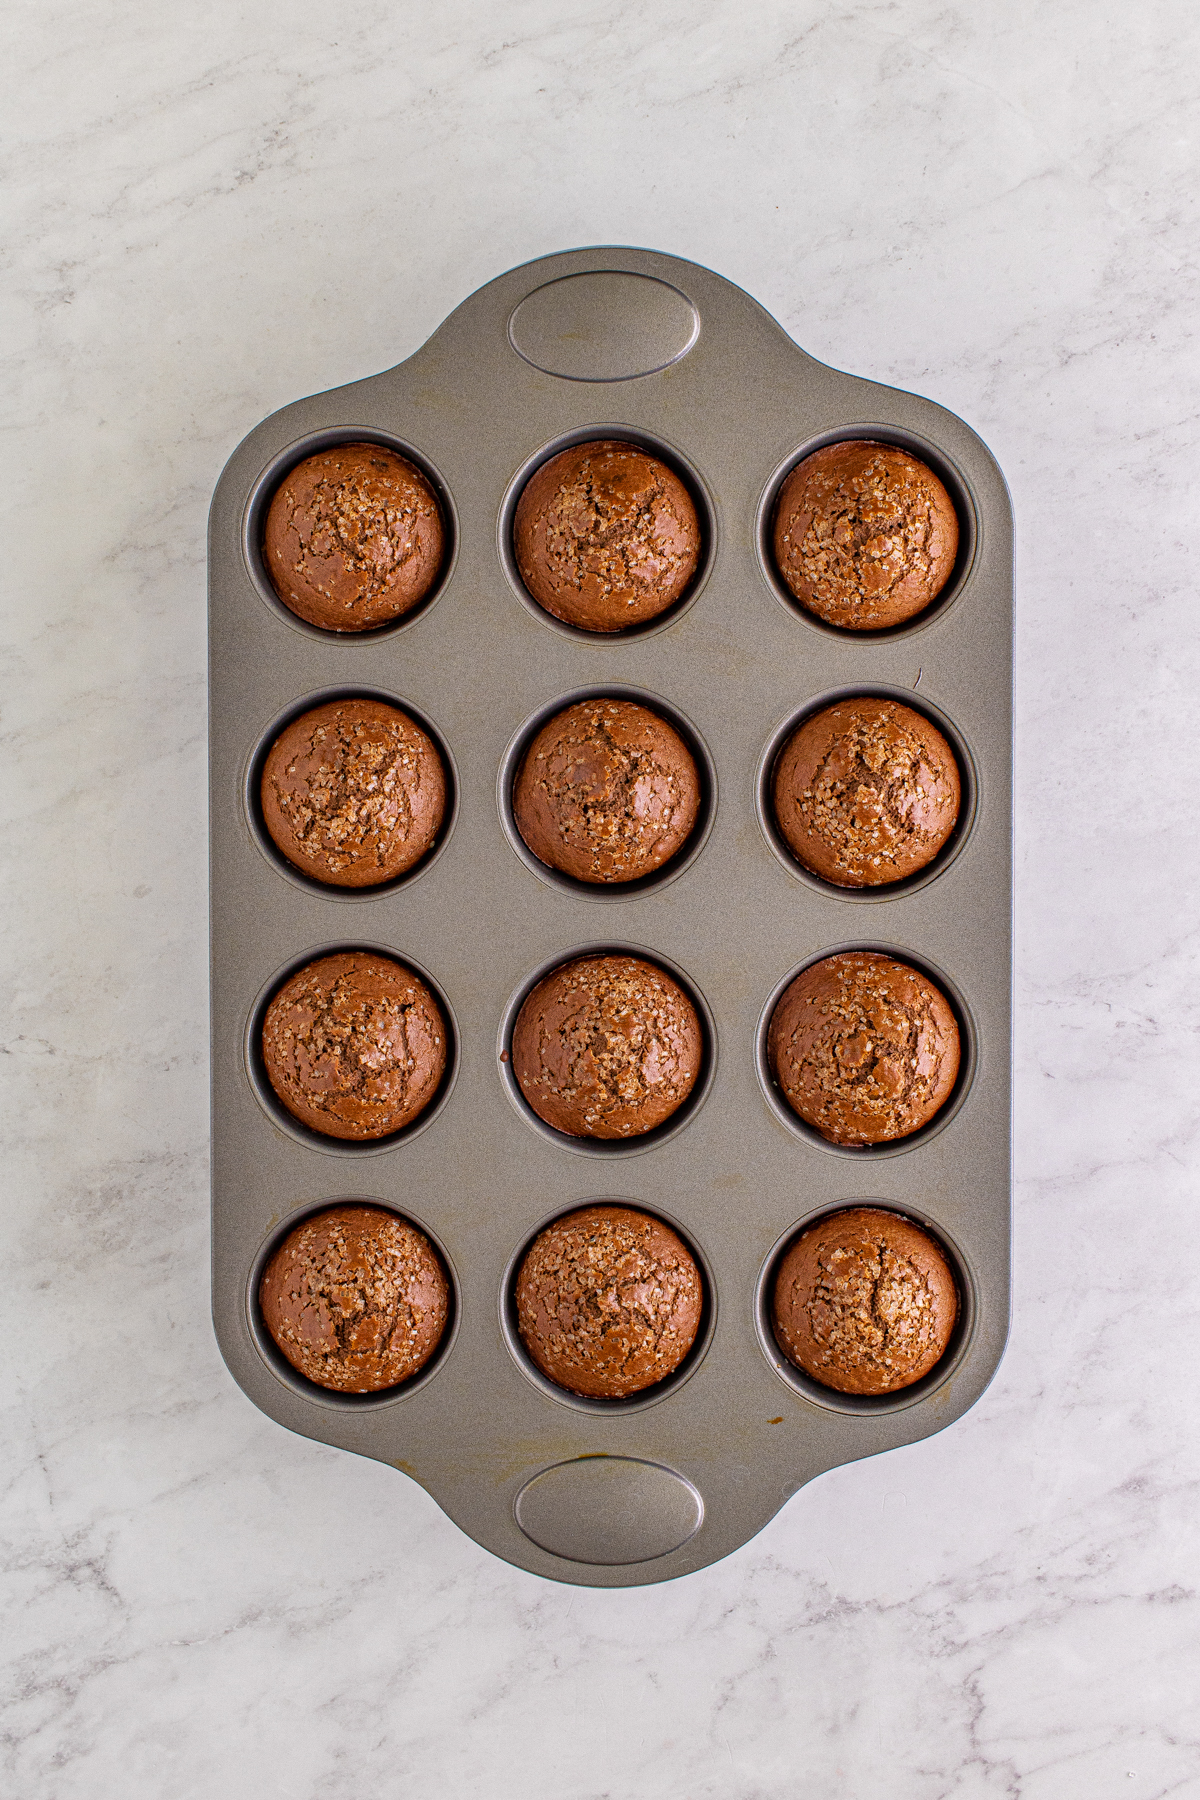 baked Nutella muffins in a pan